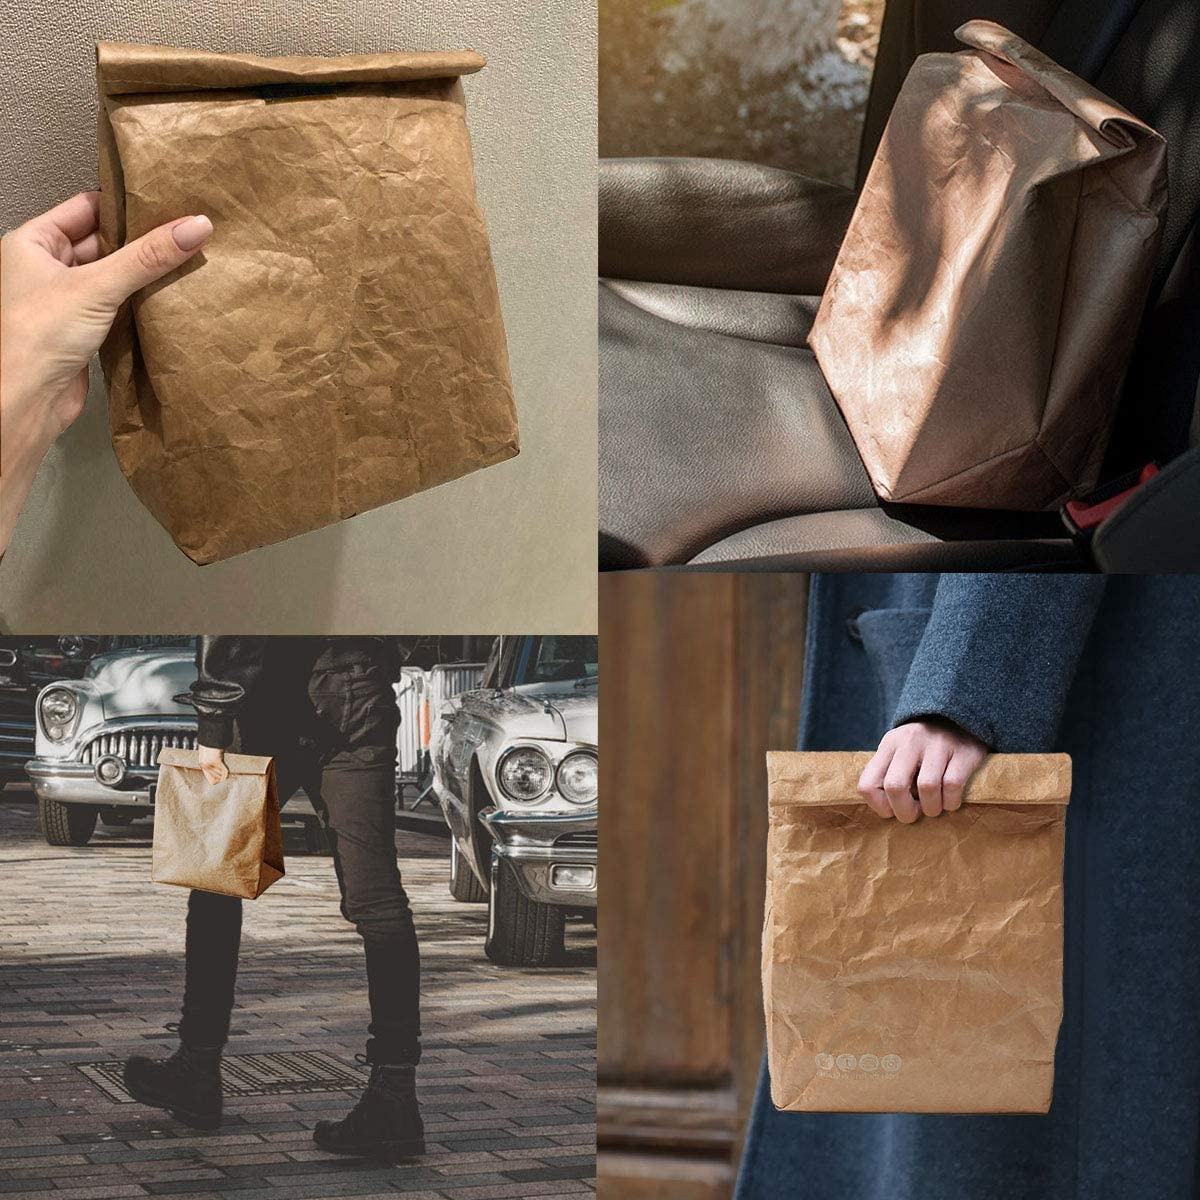 Eco Lunch Bag, Tyvek Lunch Box for Women Man, Reusable Freezable Brown Paper Snack bags for Work Picnic School